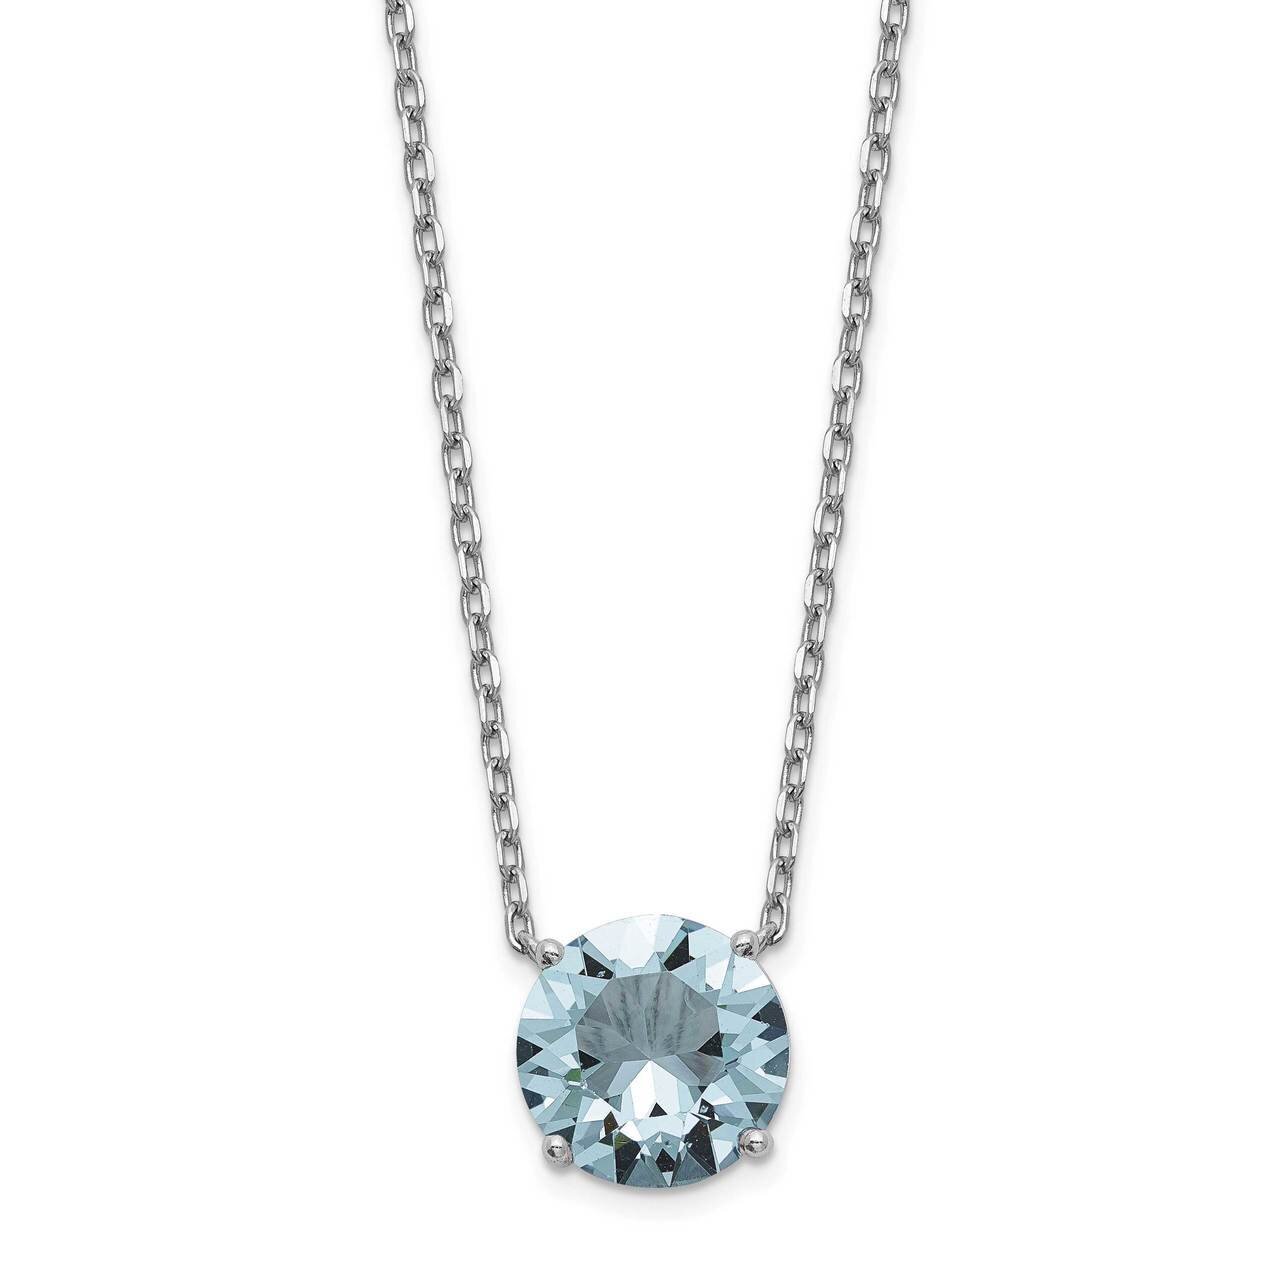 Light Blue Swarovski with 2 inch Extender Necklace Sterling Silver Rhodium-plated QG5528-16.5